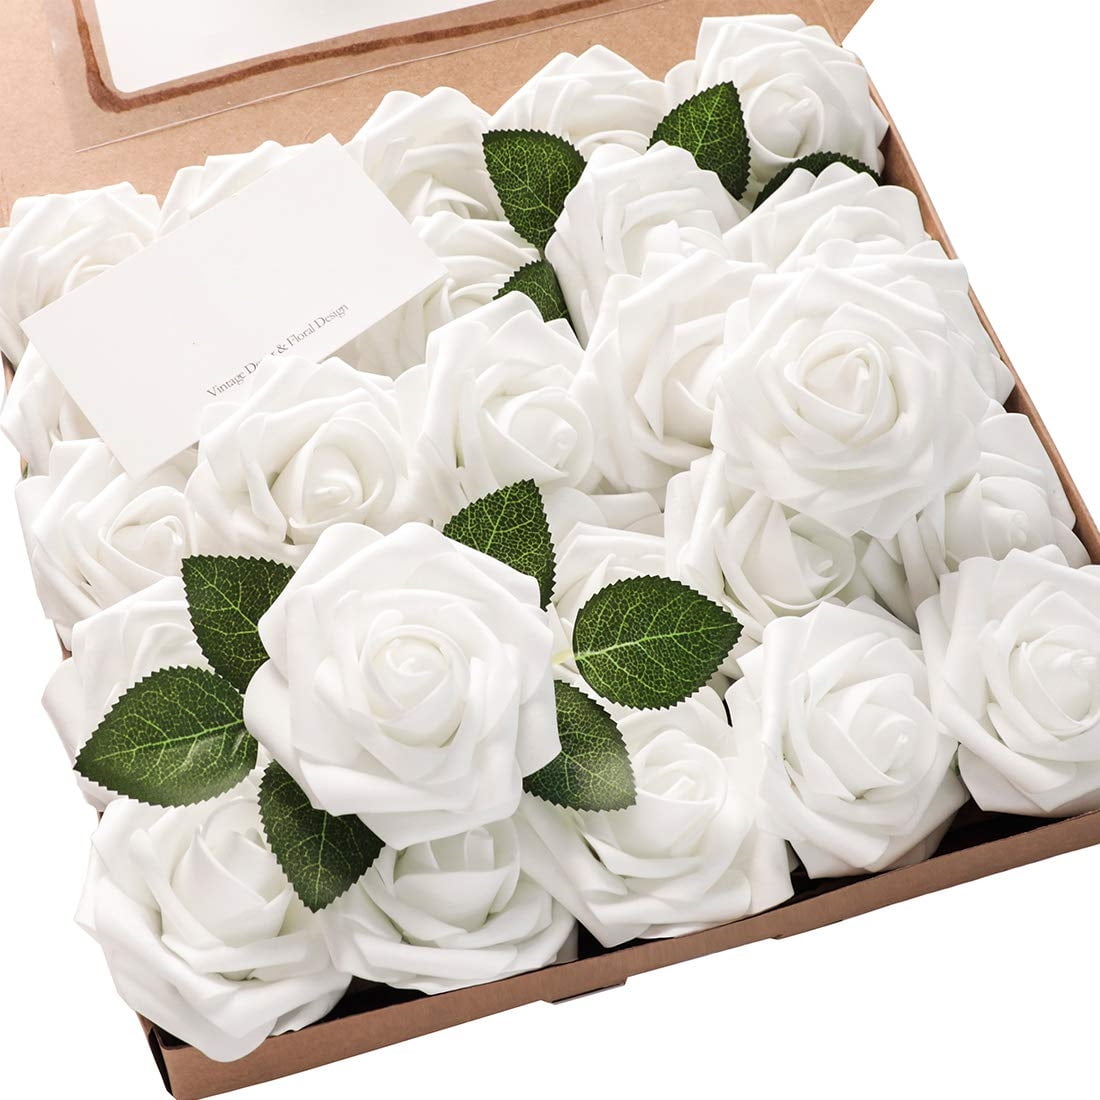 Sliver Glitter Flowers White Roses Fake Wedding Flowers 25 pcs Gift Box  Packed Flowers For Bridal Bouquets Wedding Centerpieces ZSZ-02